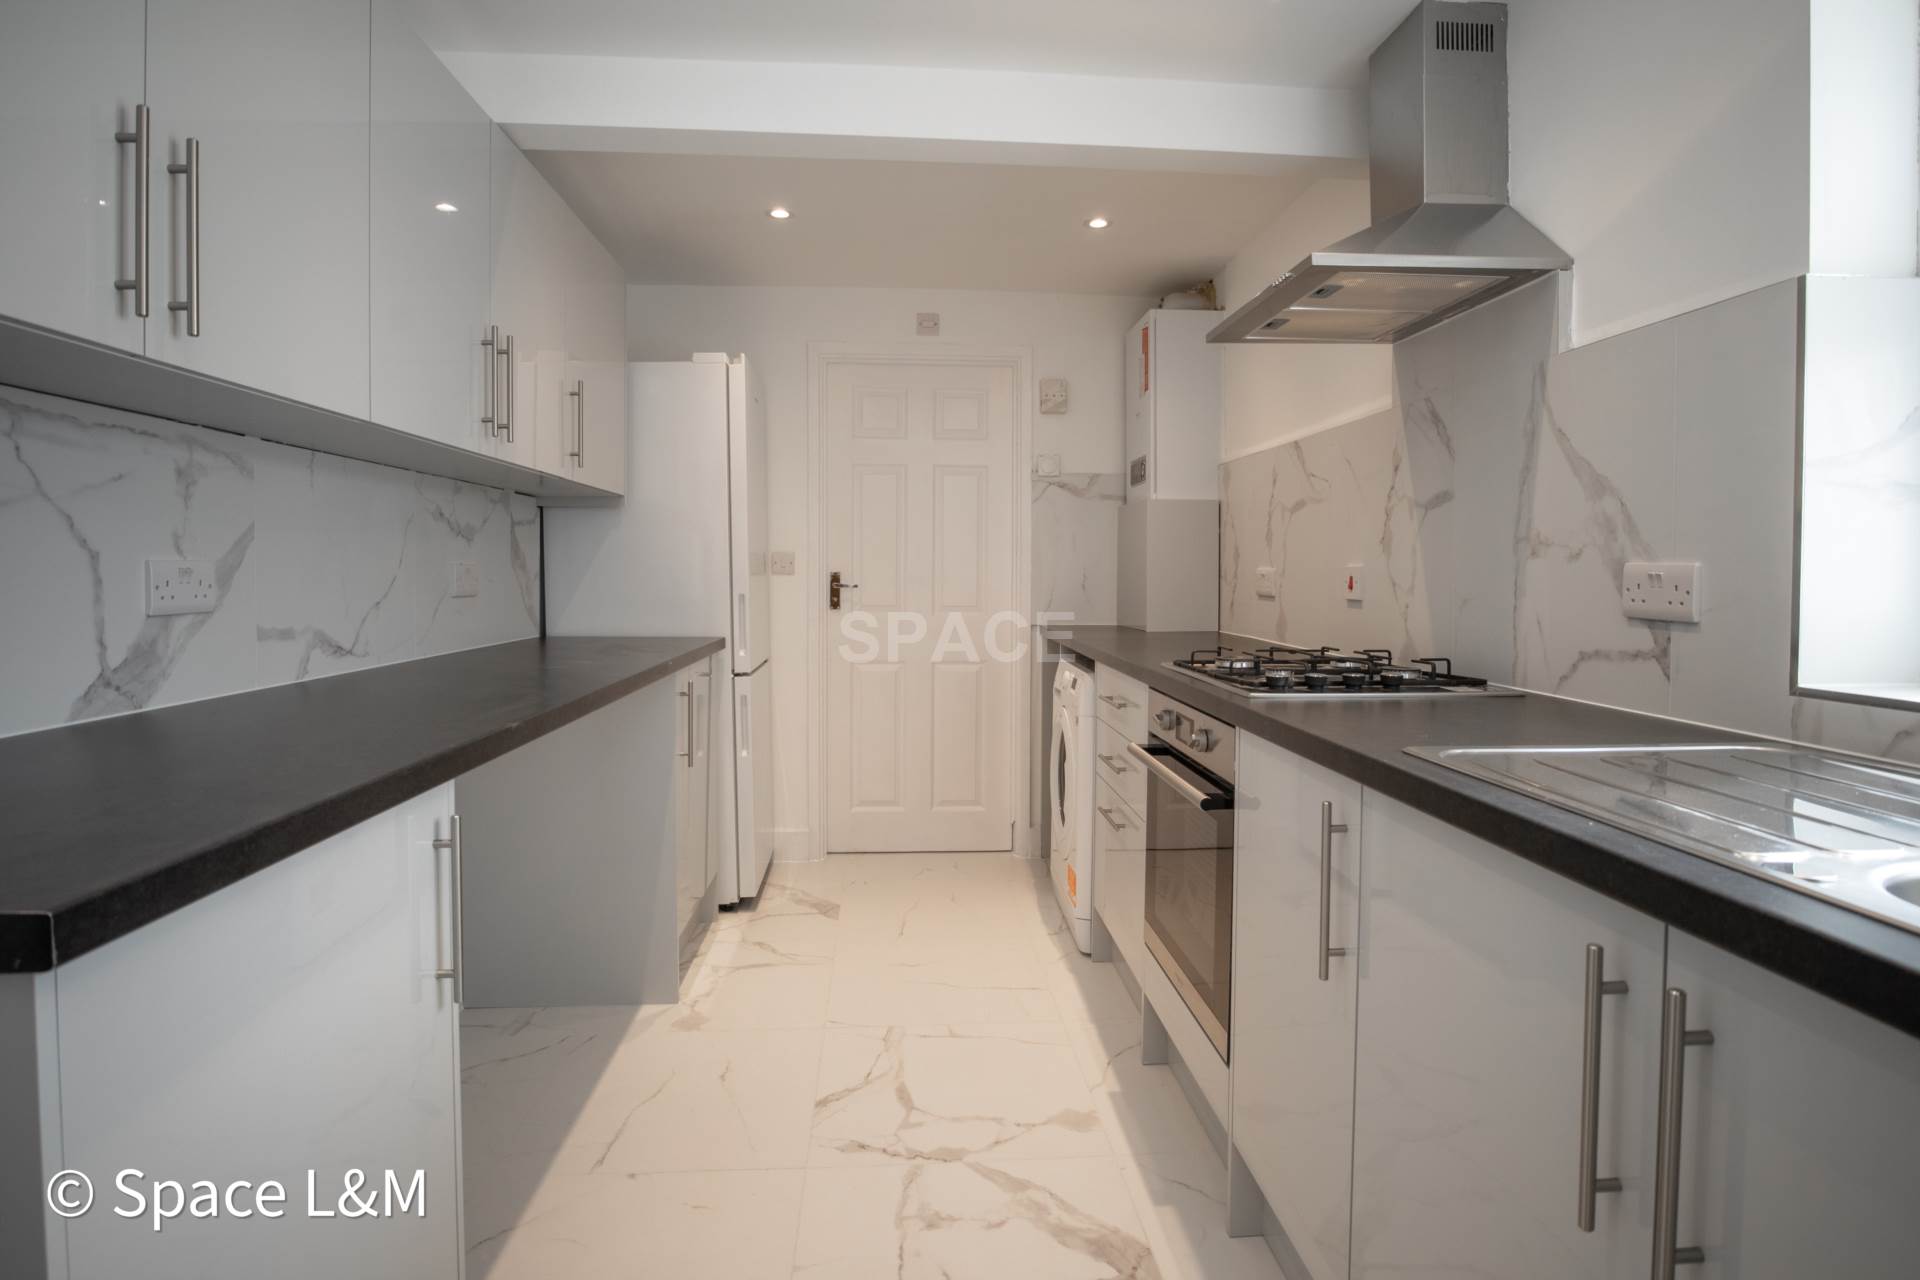 5 bed Mid Terraced House for rent in Reading. From Space